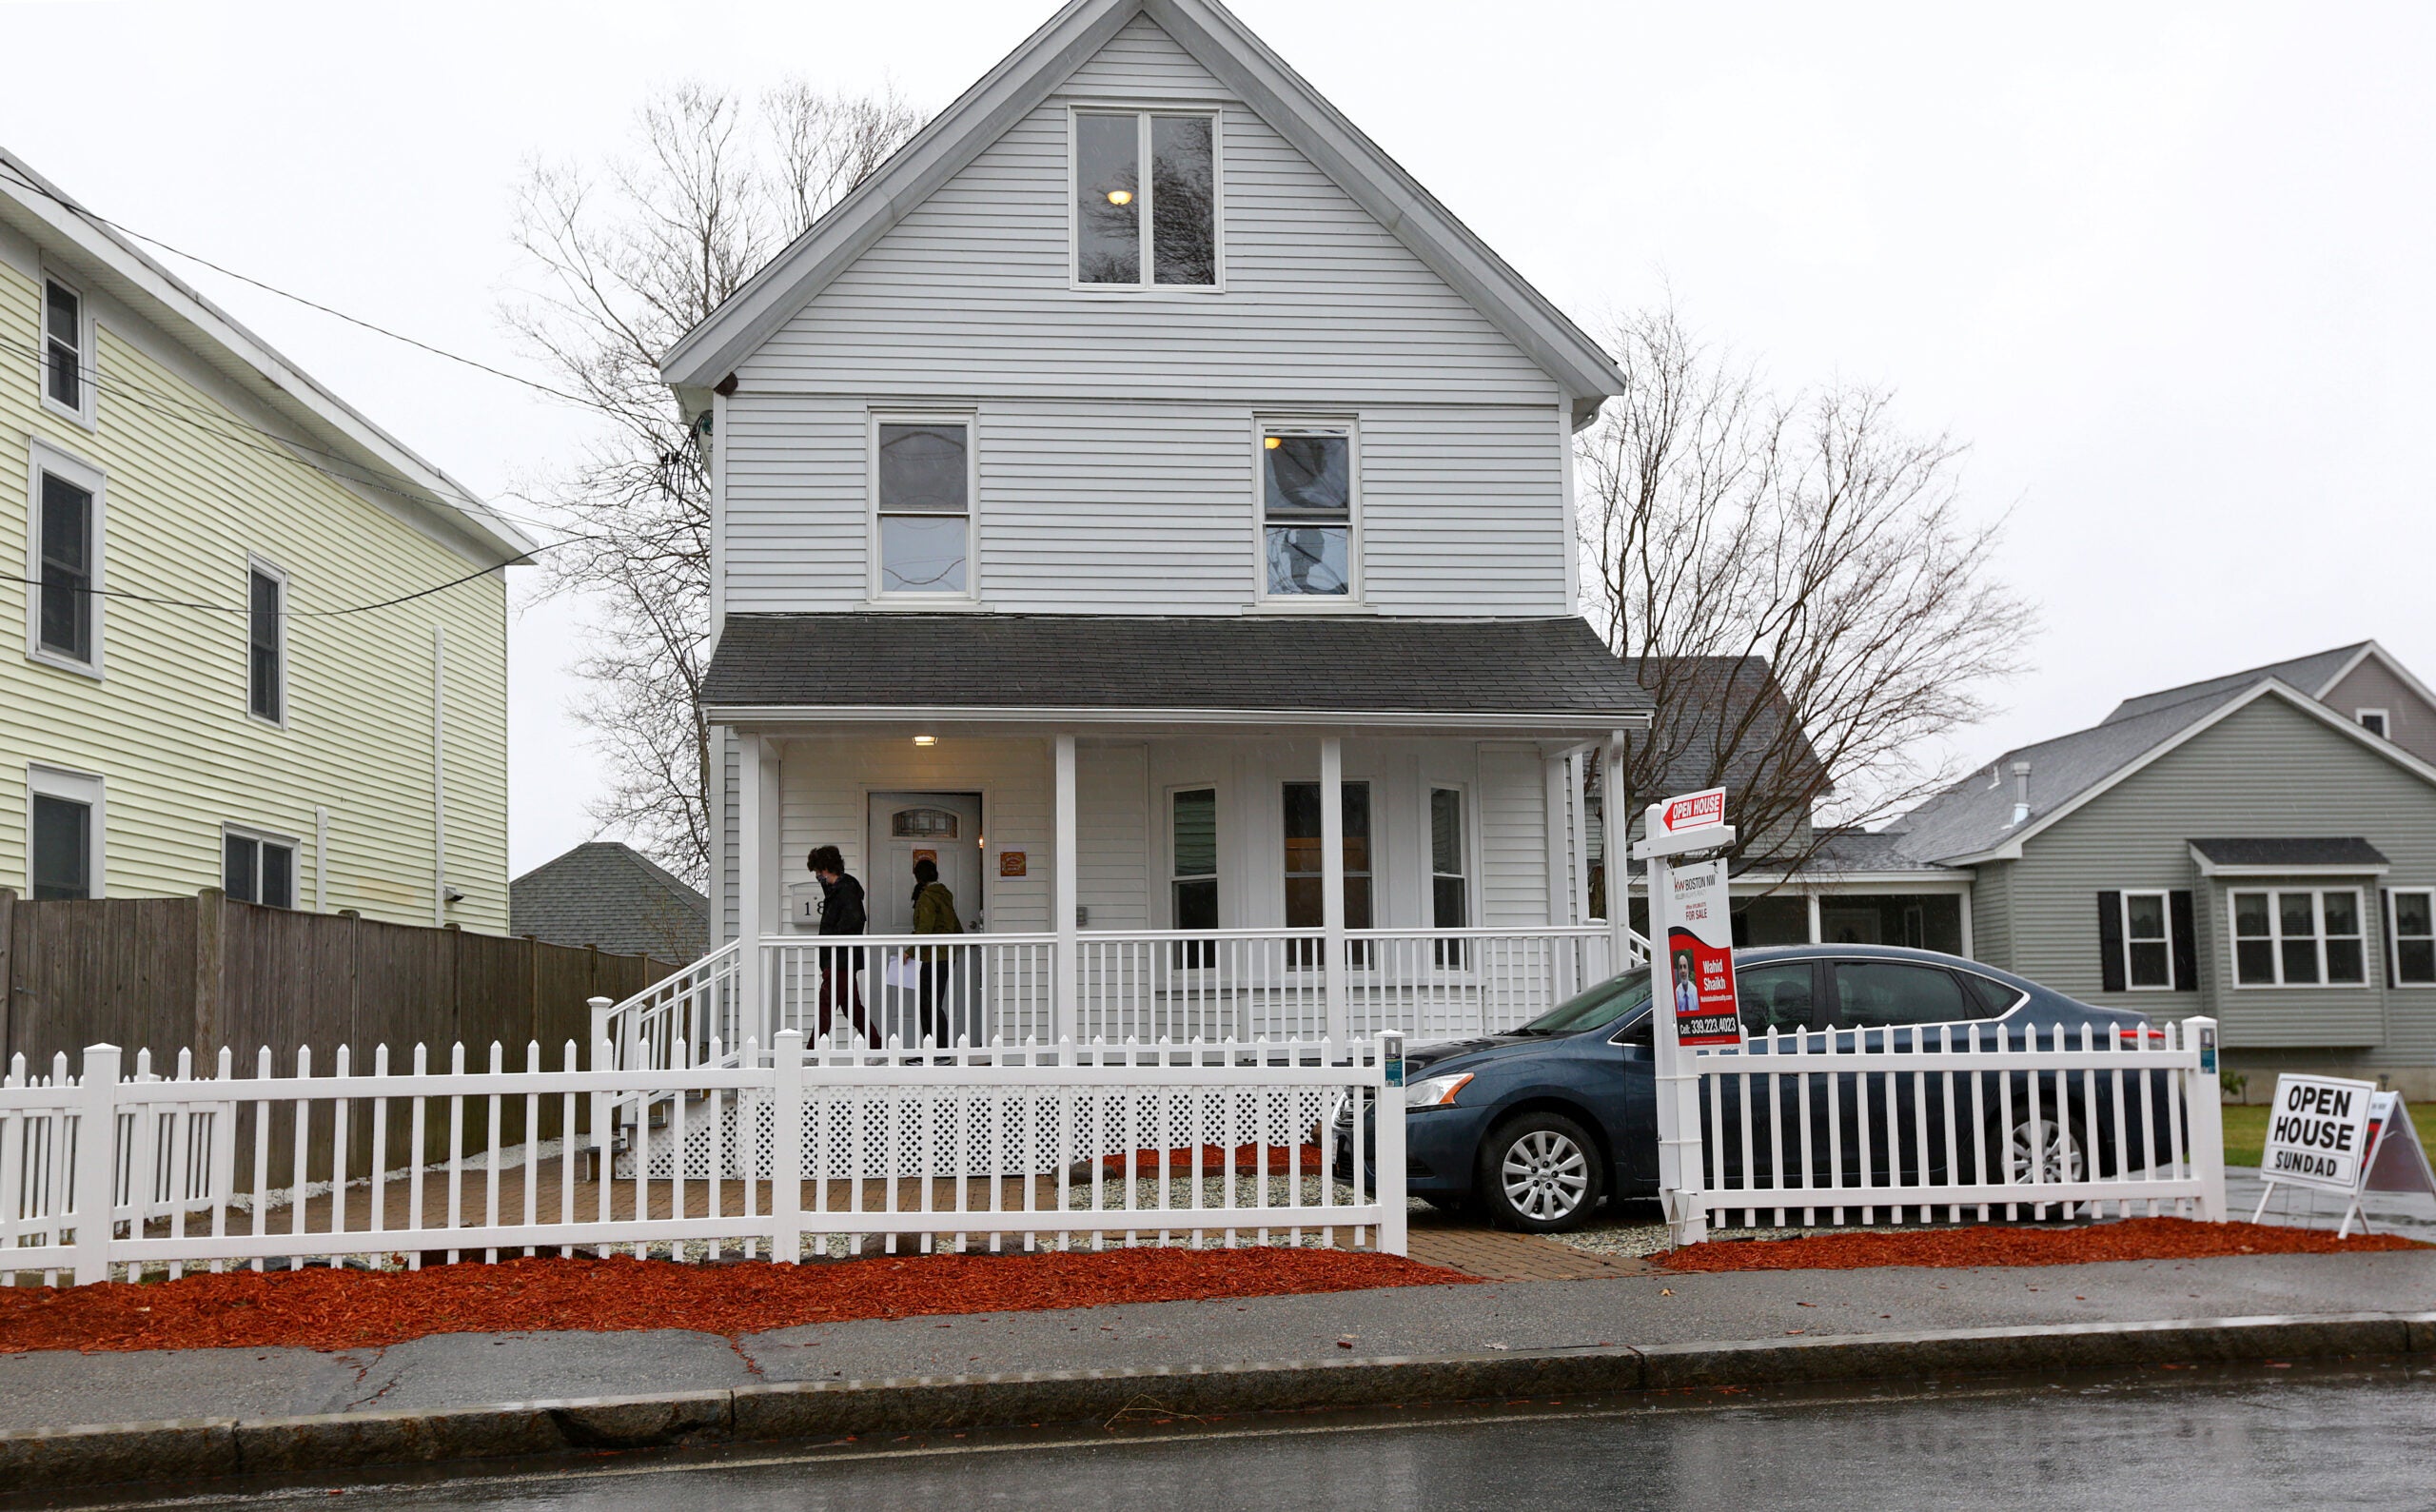 Two people left an open house at 18 Wyman St. in Woburn on March 28, 2021.